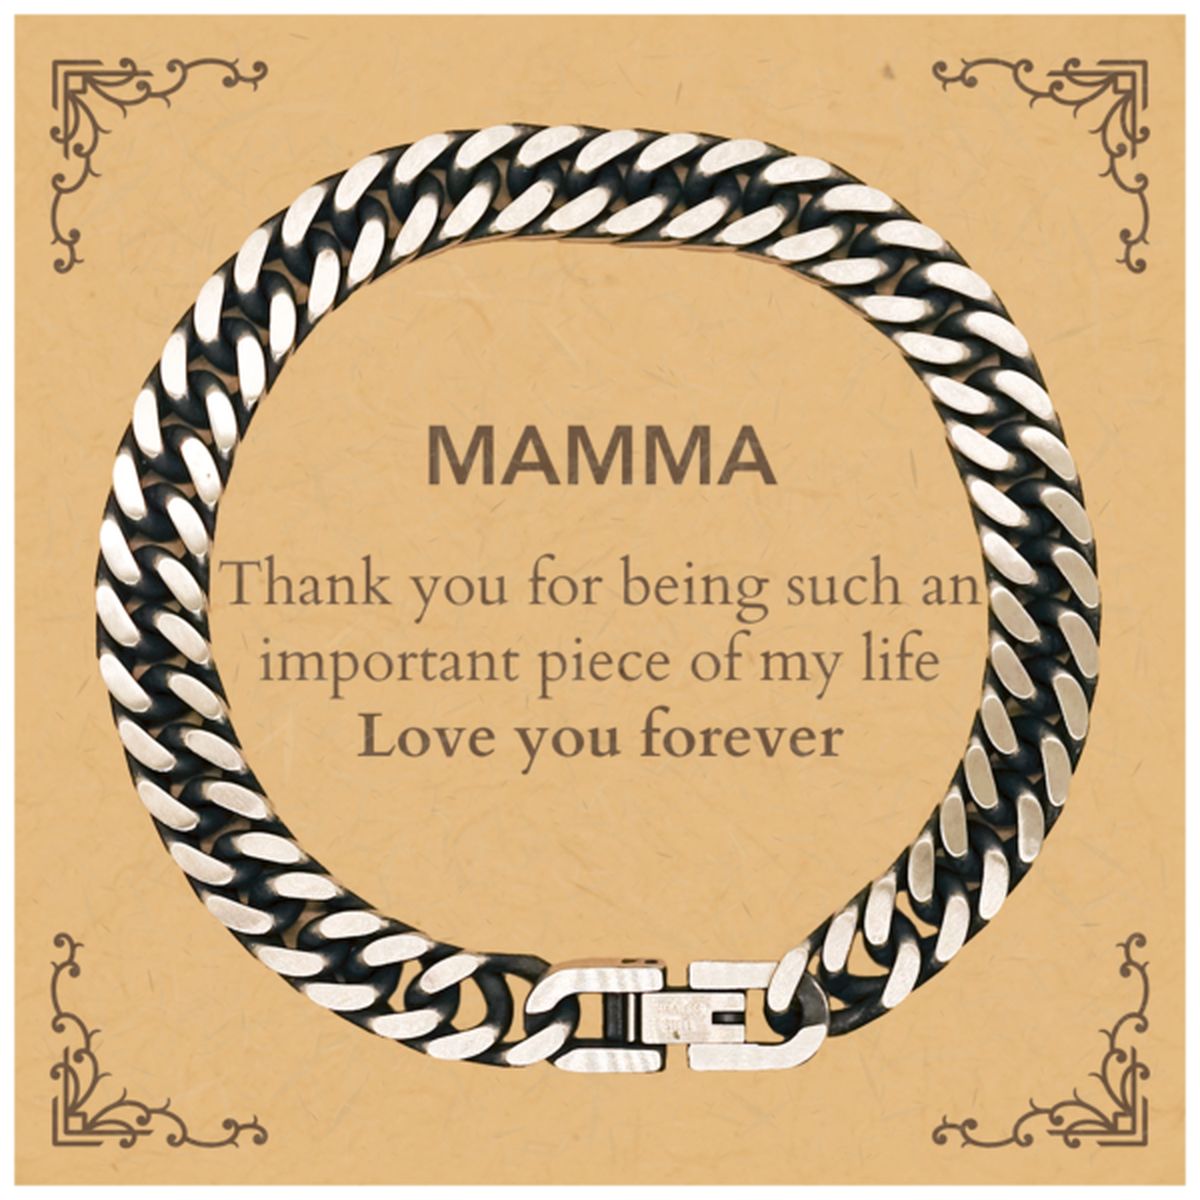 Appropriate Mamma Cuban Link Chain Bracelet Epic Birthday Gifts for Mamma Thank you for being such an important piece of my life Mamma Christmas Mothers Fathers Day